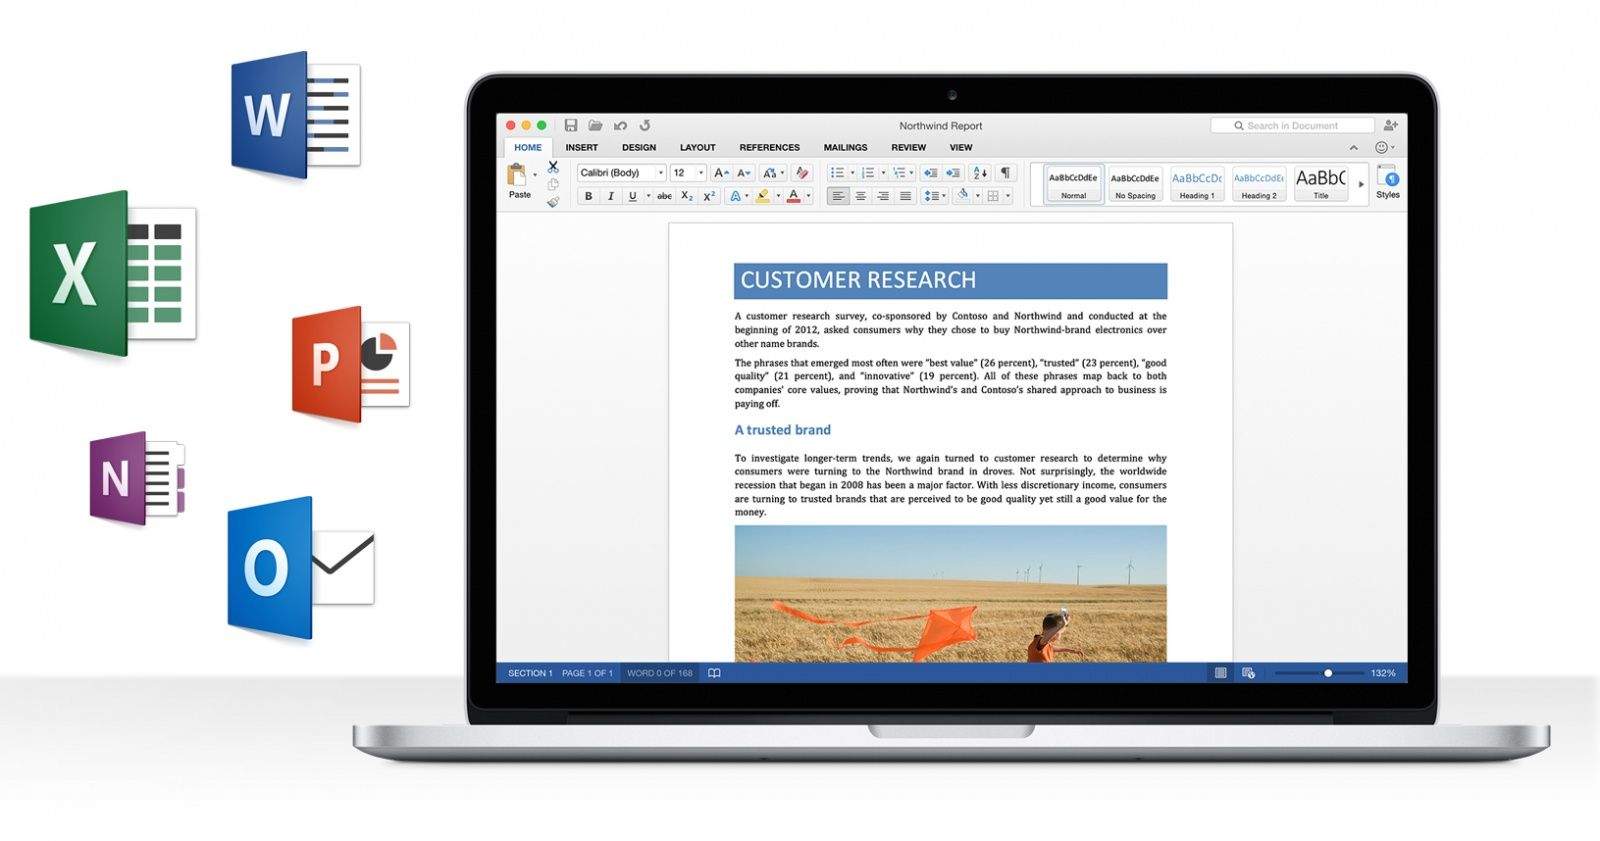 microsoft office 2011 home and business for mac download